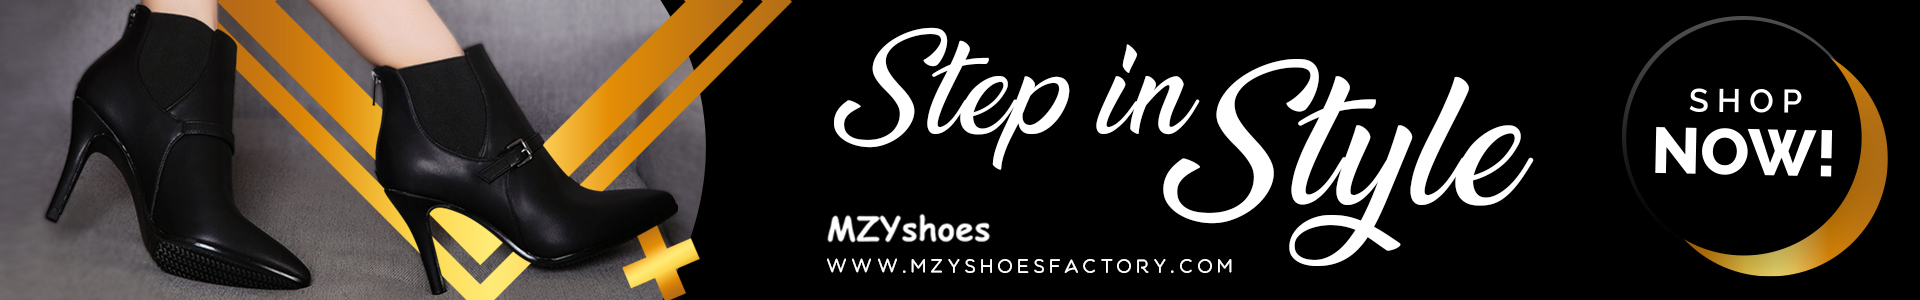 MZY Shoe Facotry